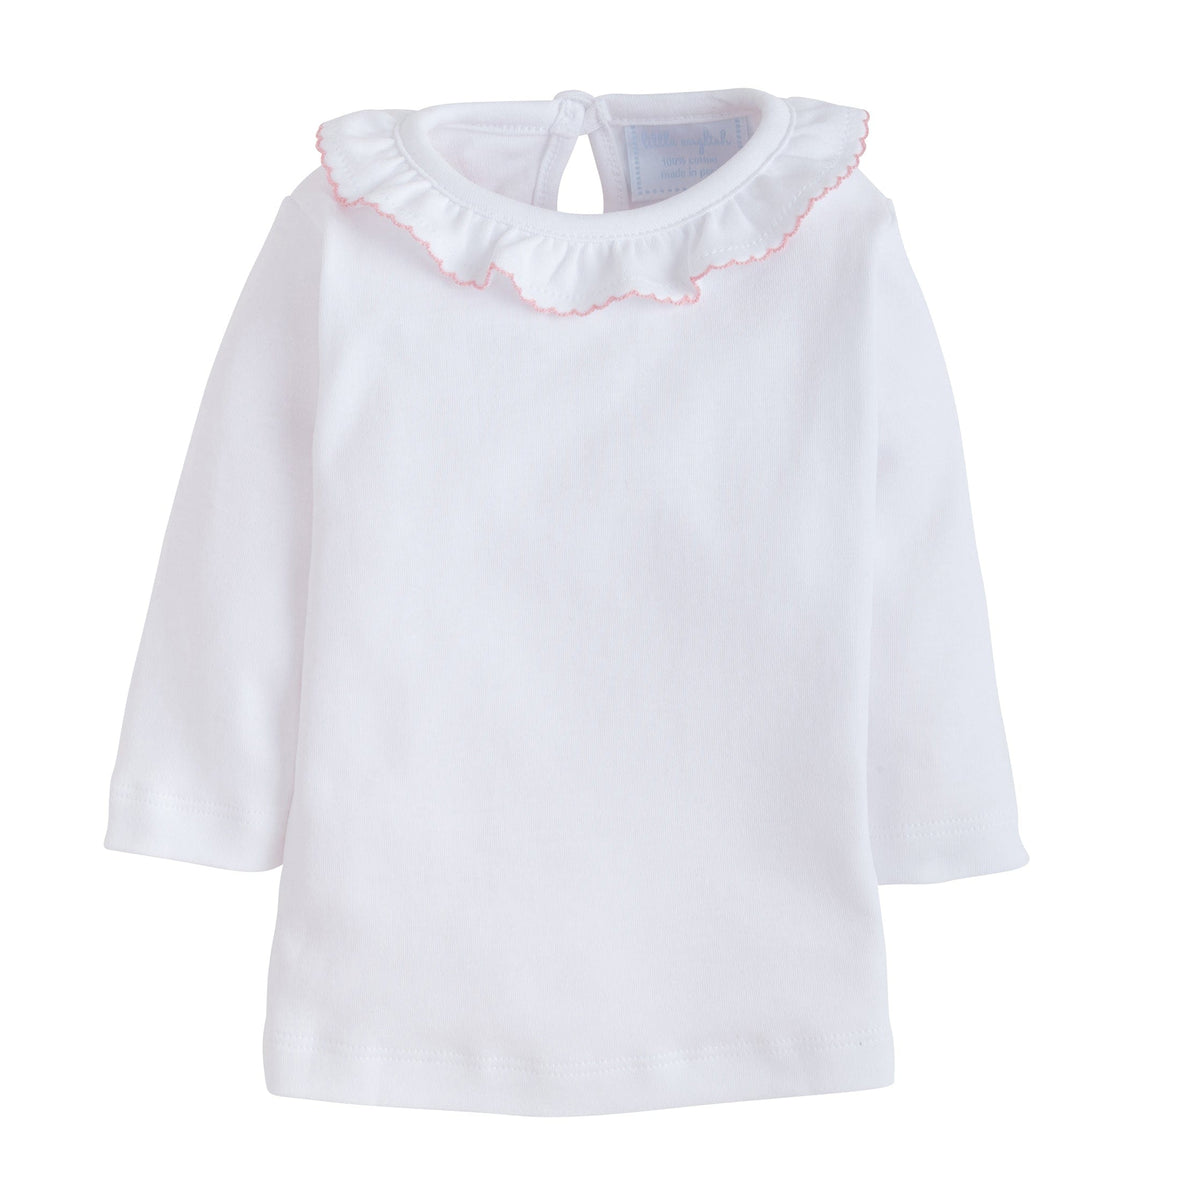 seguridadindustrialcr classic childrens clothing girls white blouse with ruffled collar and pink trim picot